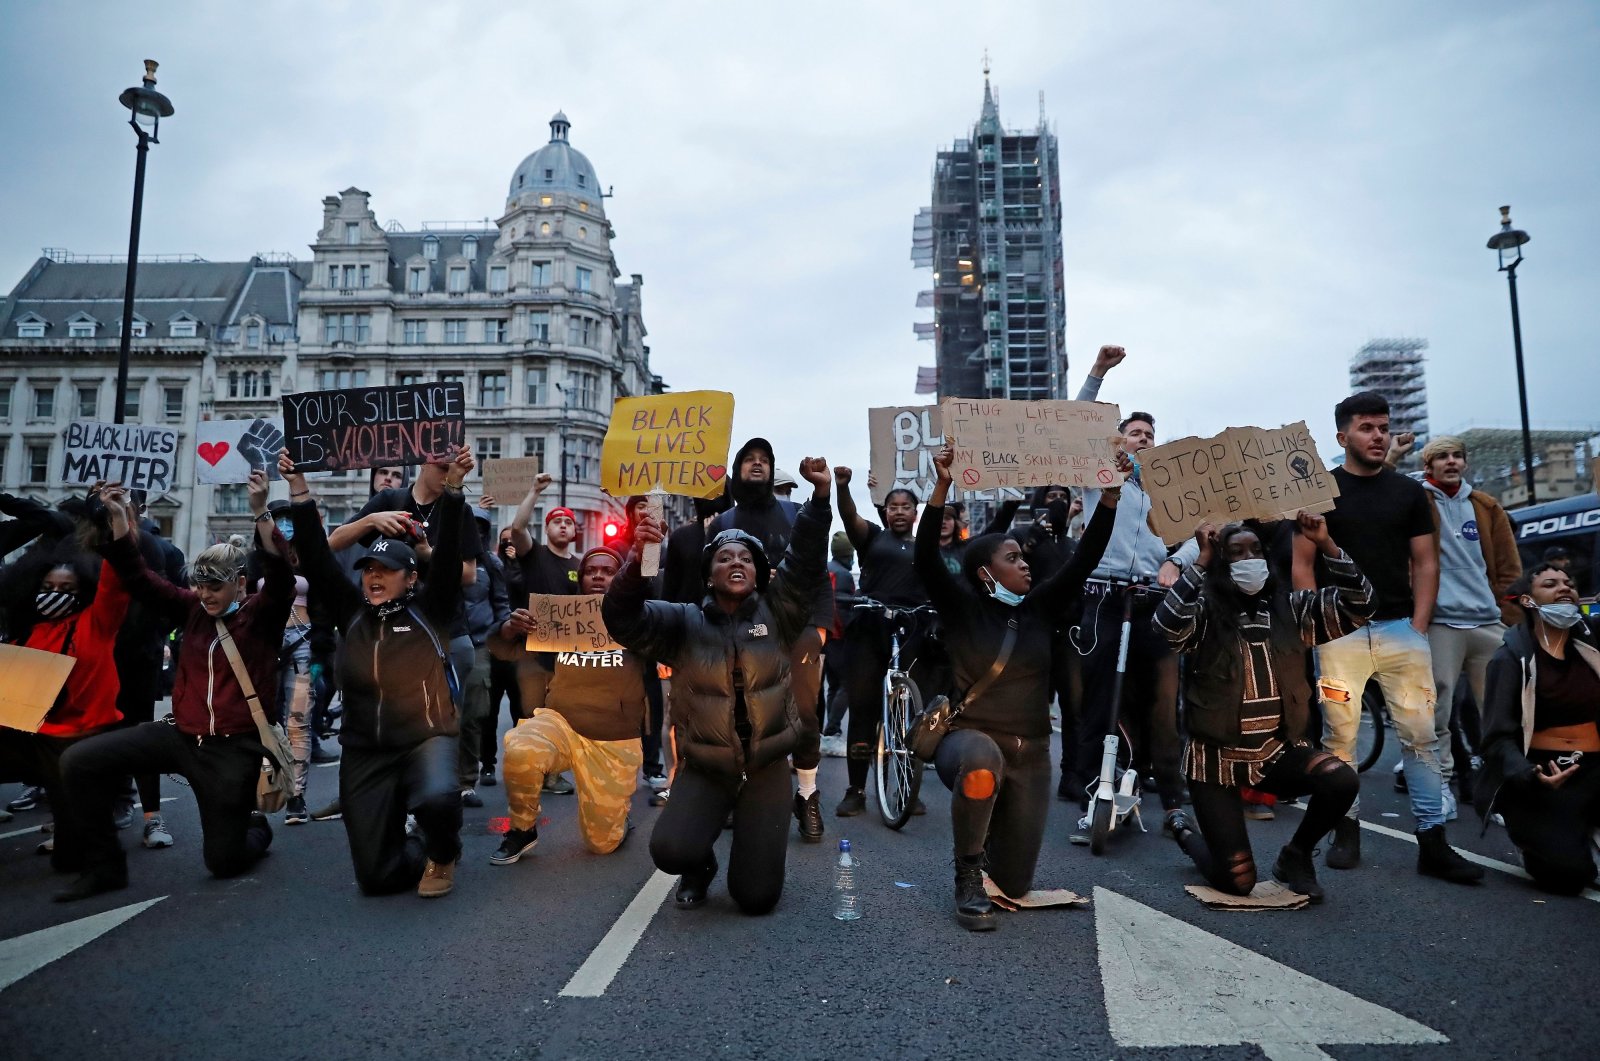 Protestors hold placards as they kneel in front of police vans in Parliament Square, during an anti-racism demonstration in London, on June 3, 2020. (AFP Photo)